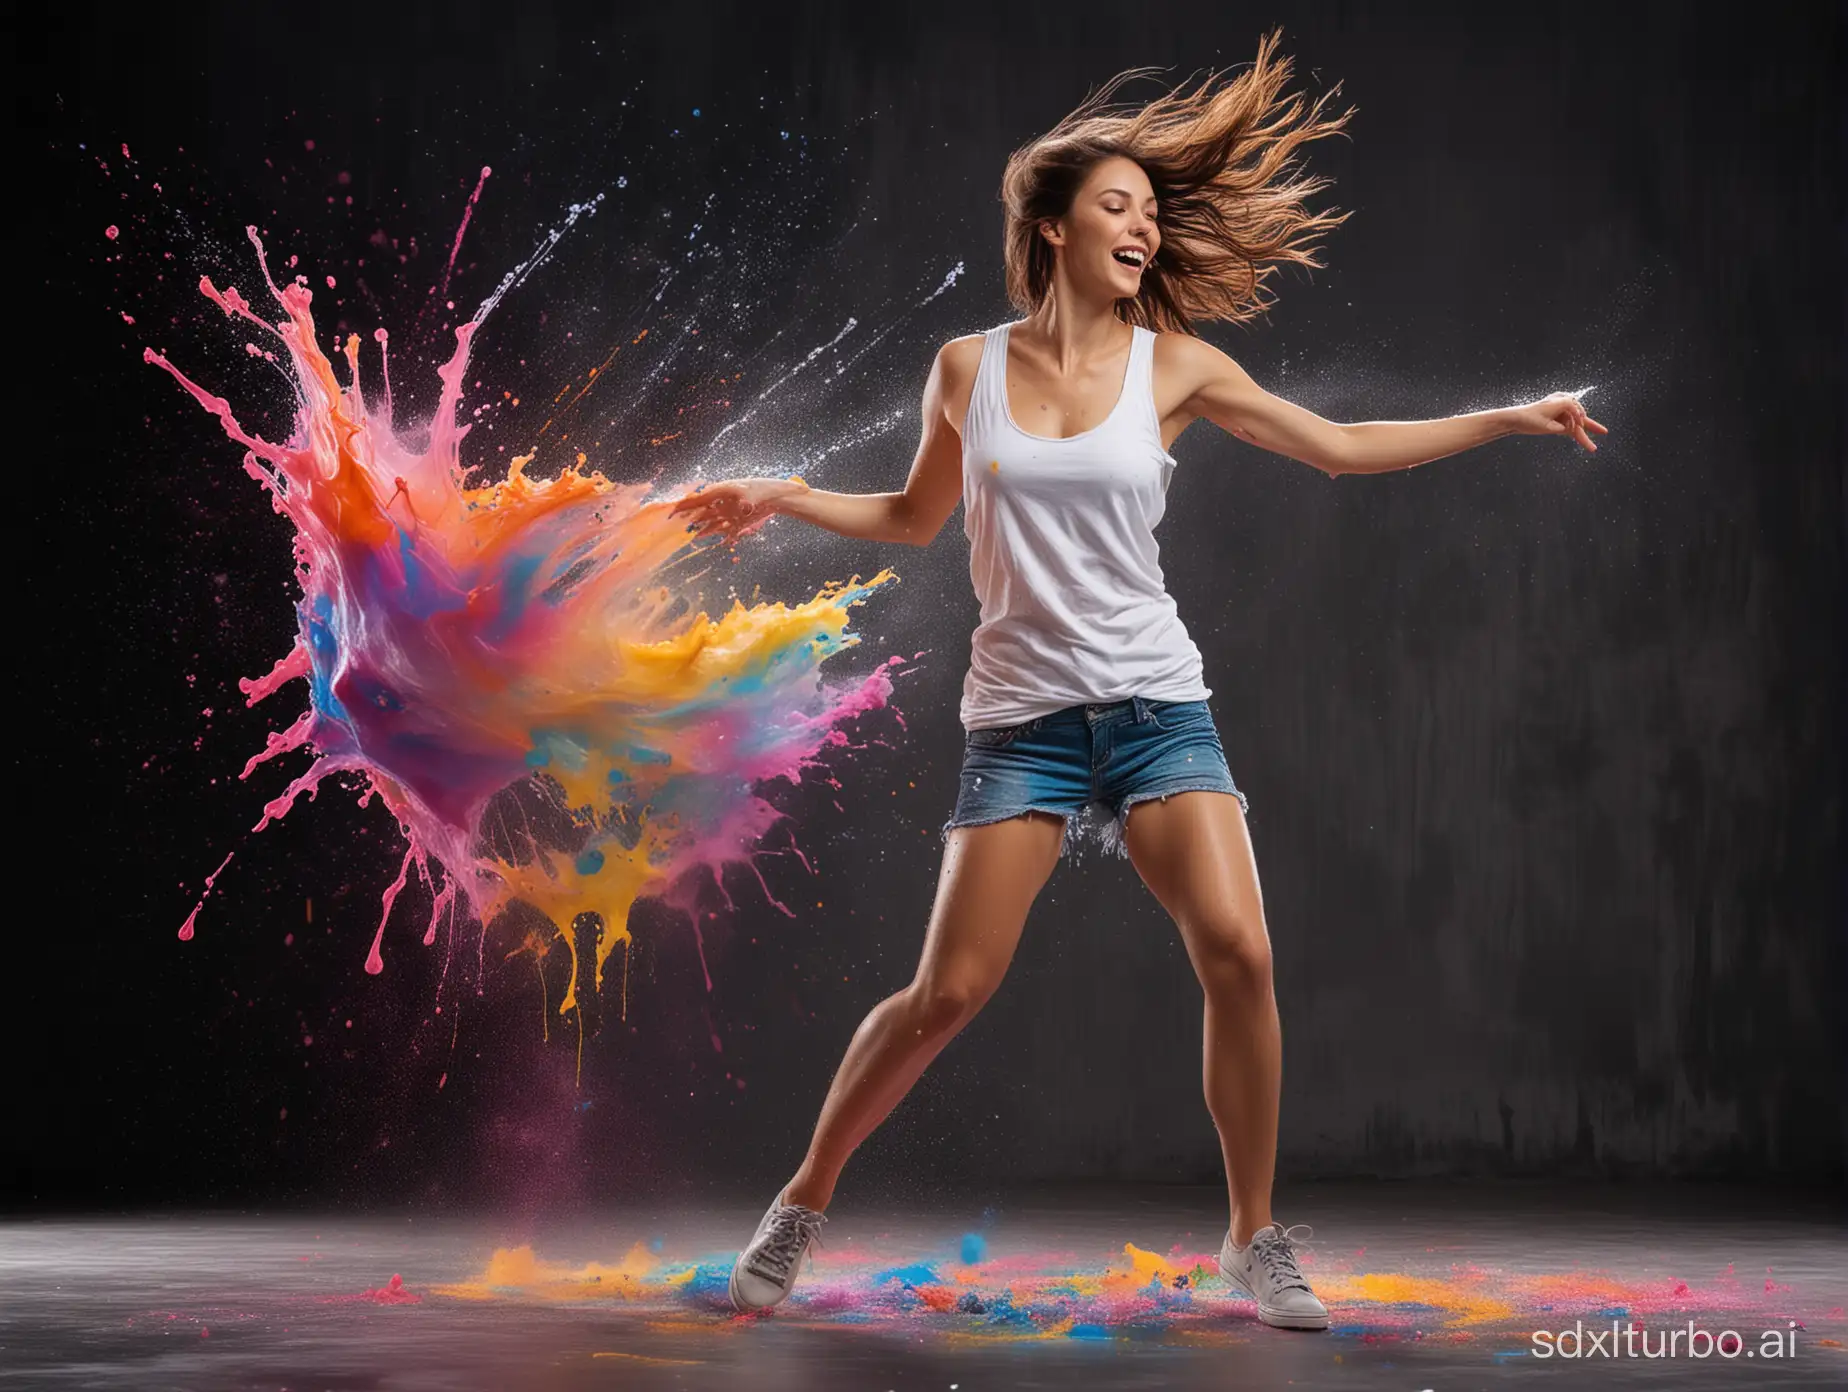 A beautiful and playful woman wearing a white tank top and short jeans dress, dancing in the vibrant splashes of colorful liquid, almost like paint, mid-air against a dark background. The vivid colors stand out dramatically, creating an energetic and dynamic effect. It's as if each color has its own personality, leaping and interacting with the others. The way the light reflects off the liquids adds depth and intensity to the scene. It's a visually captivating and highly aesthetic representation of motion and color contrast.